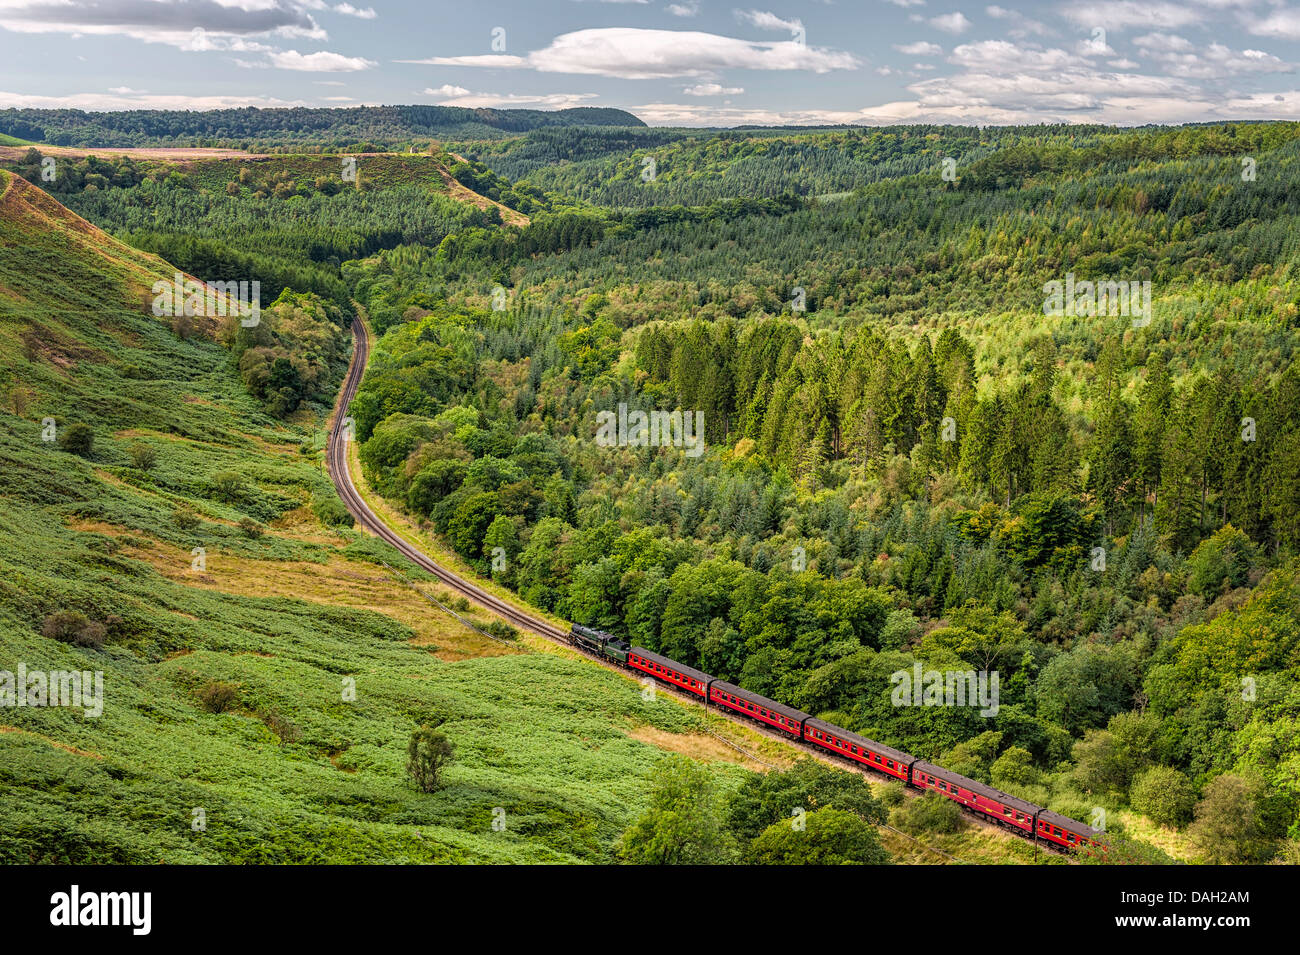 Vintage steam train on its way to Pickering from Whitby through woodland in the North York Moors National Park, Yorkshire, UK. Stock Photo